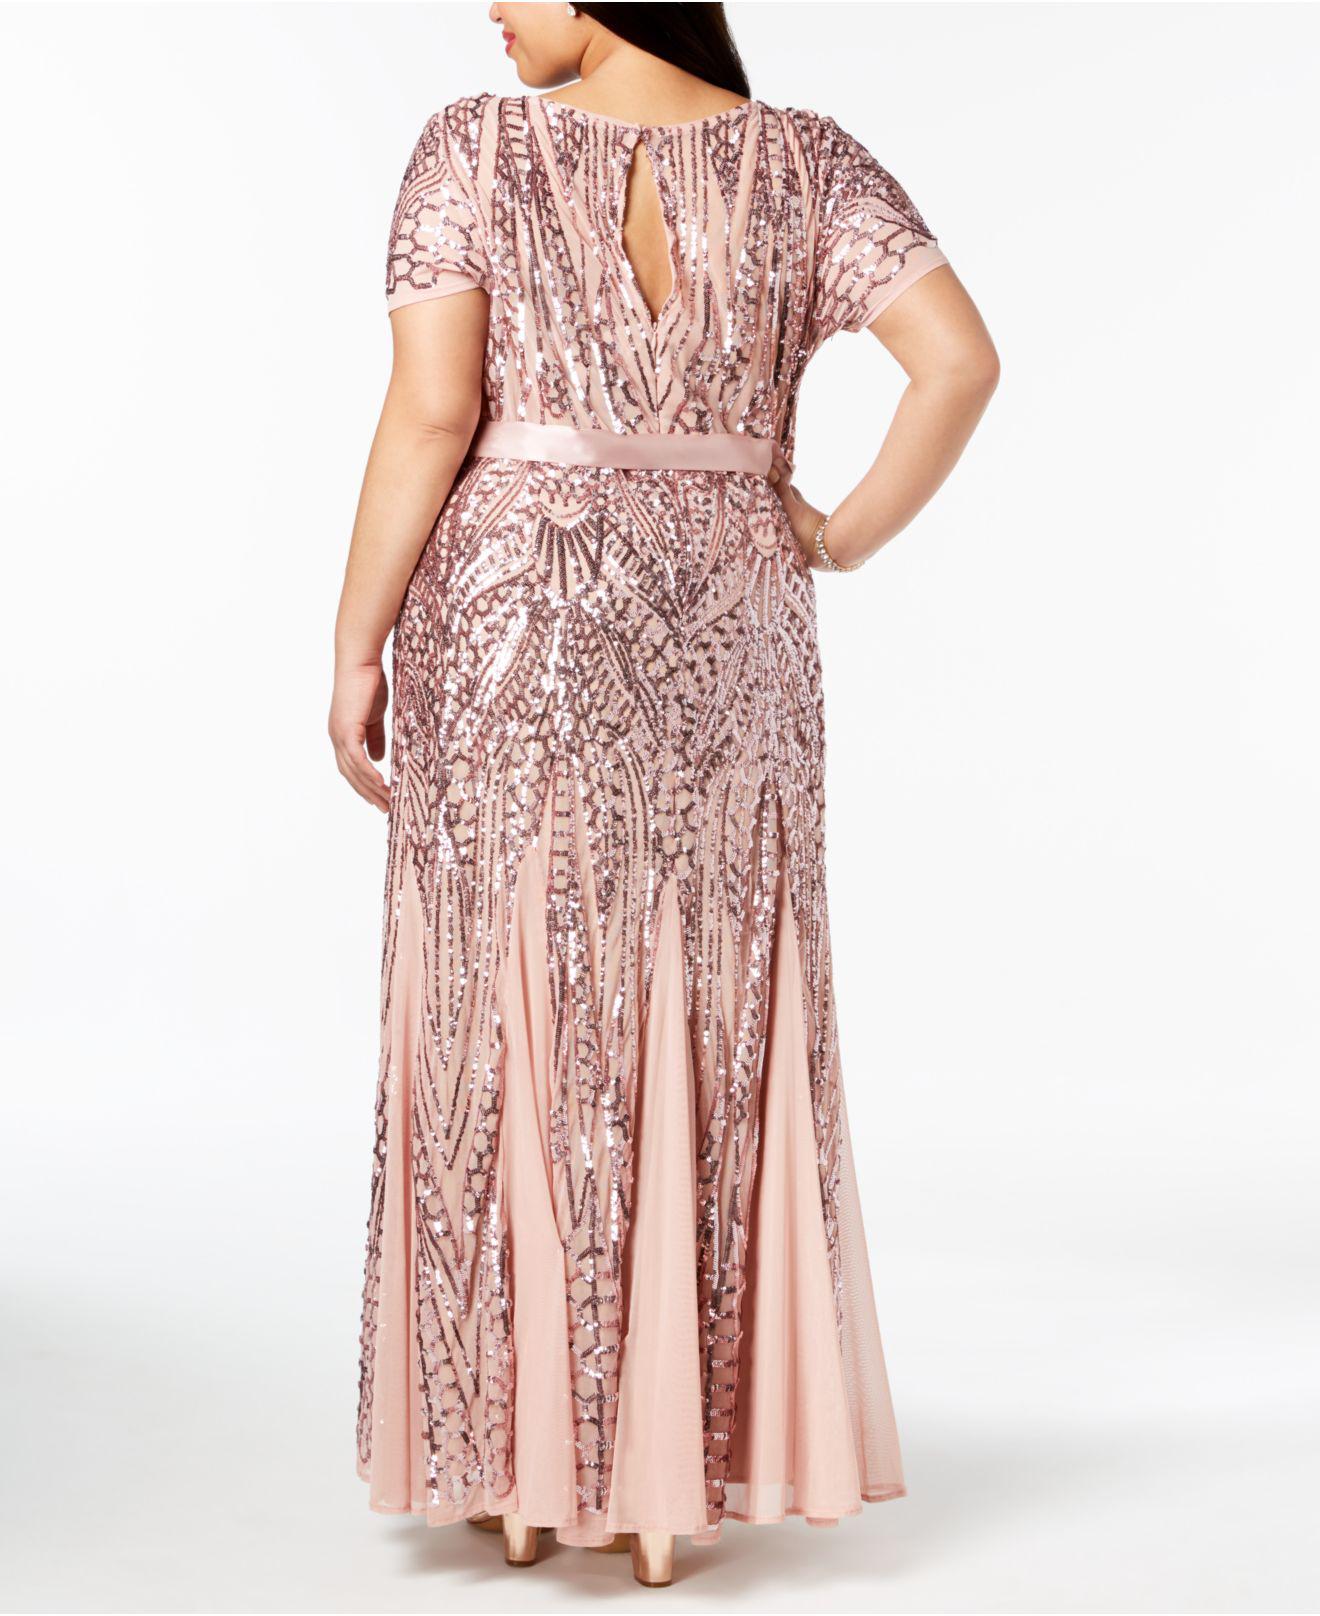 R & M Richards Satin Plus Size Sequined Godet Gown in Pink - Lyst